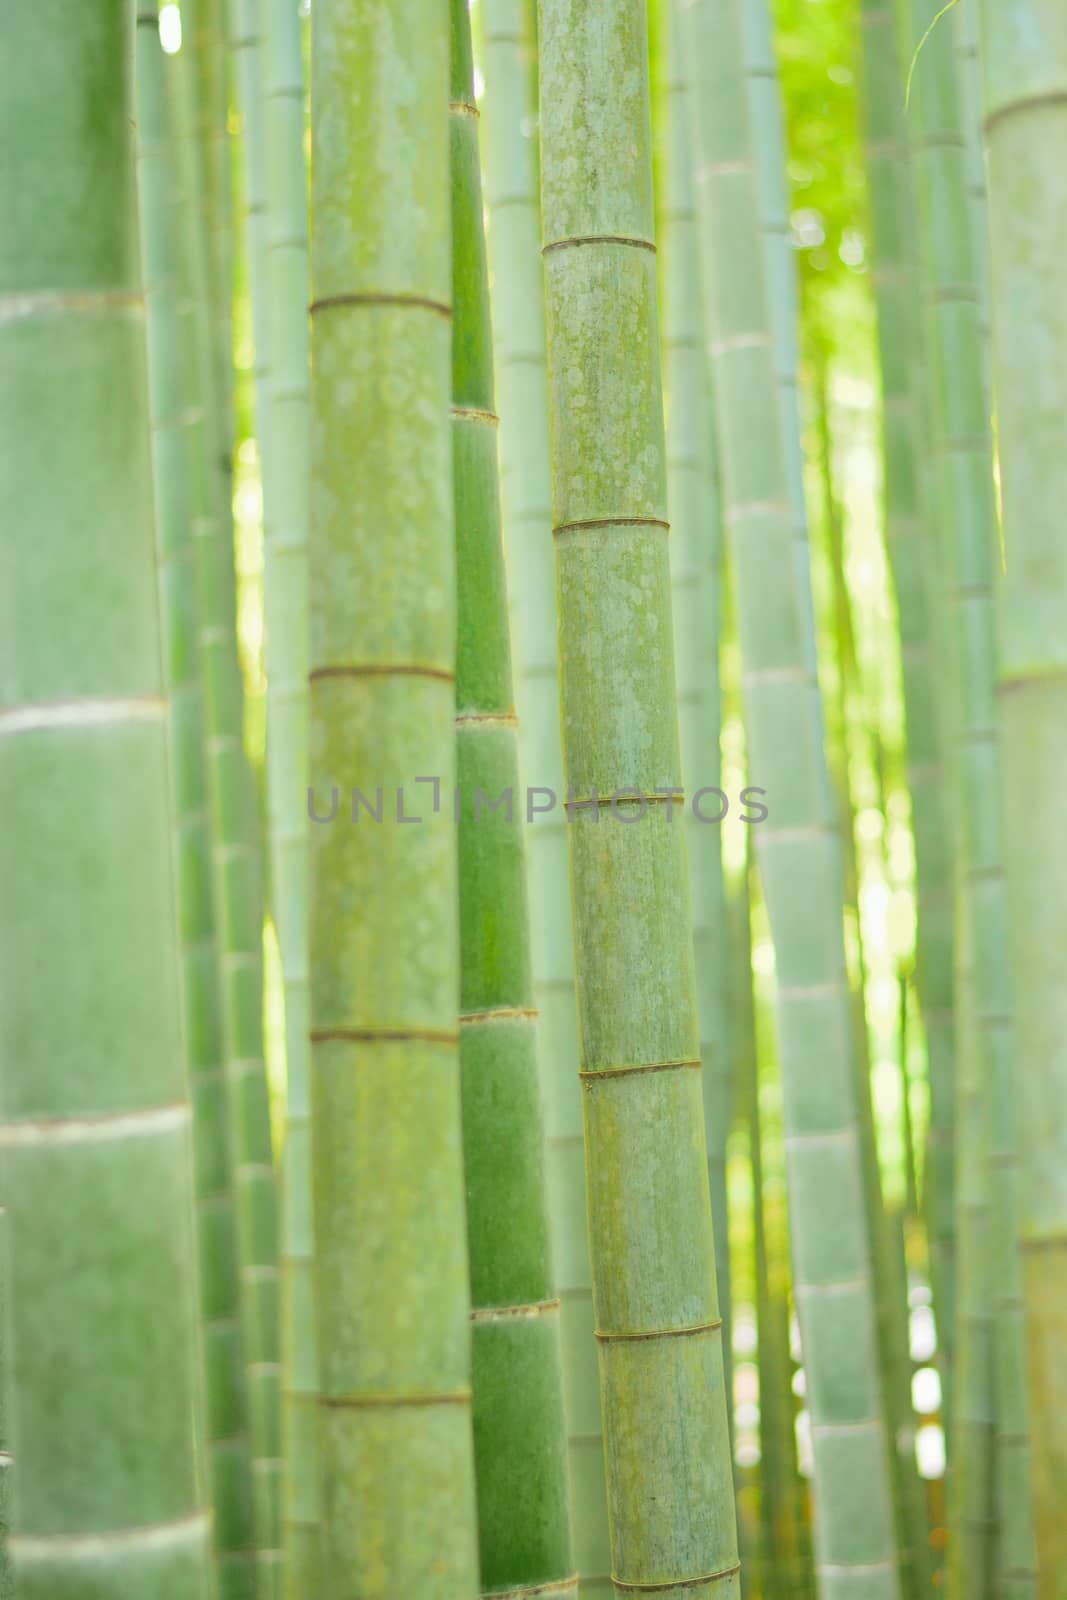 Lush green Japanese Bamboo forests background in vertical frame